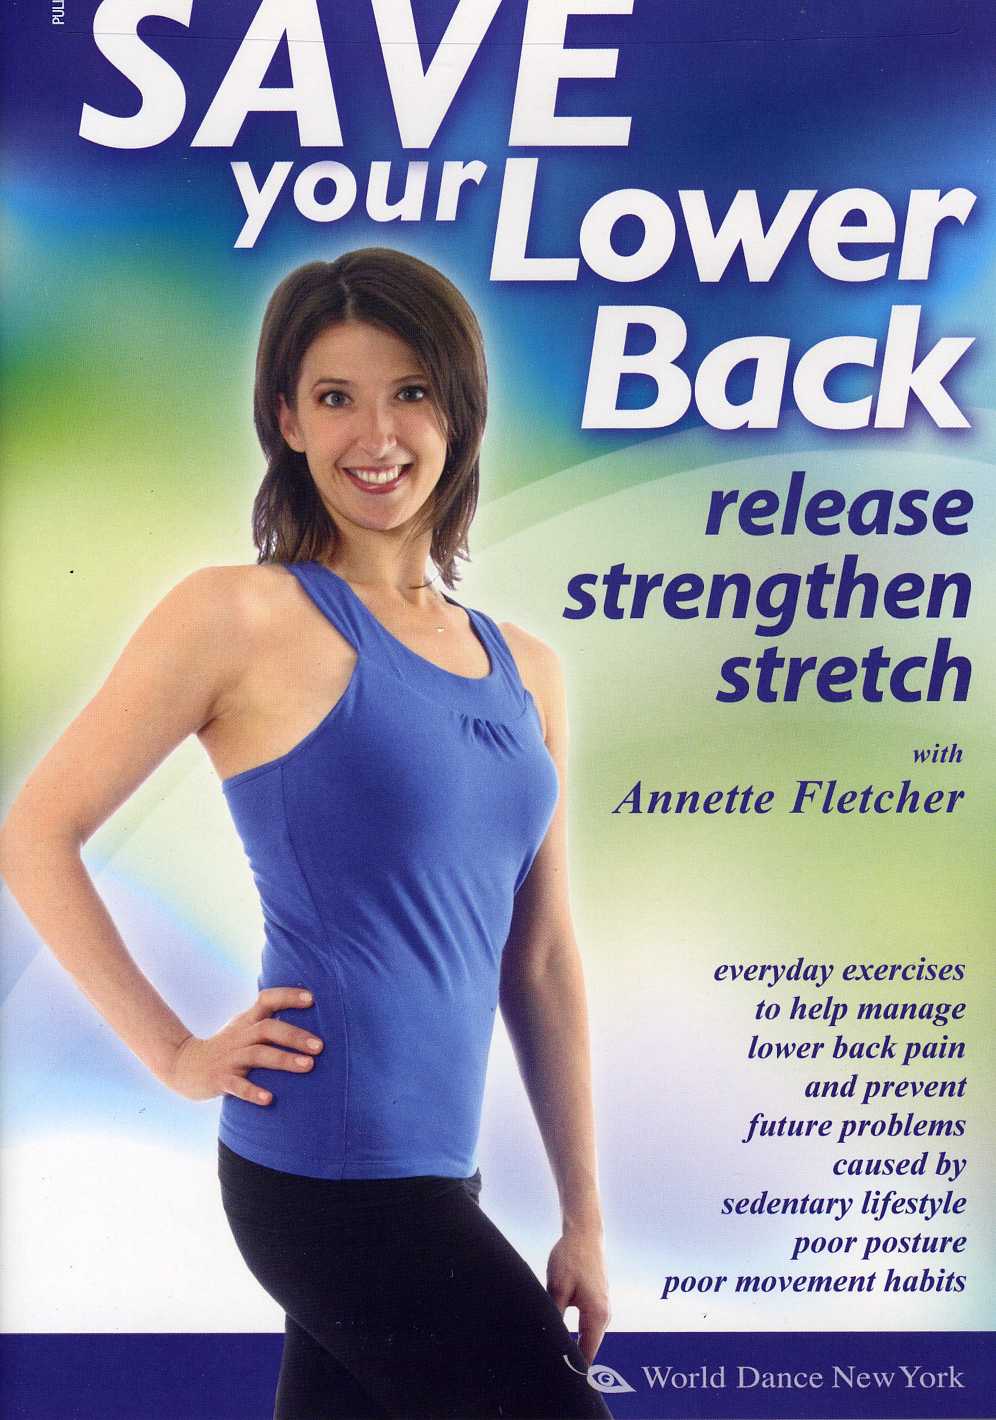 SAVE YOUR LOWER BACK: RELEASE STRENGTHEN & STRETCH